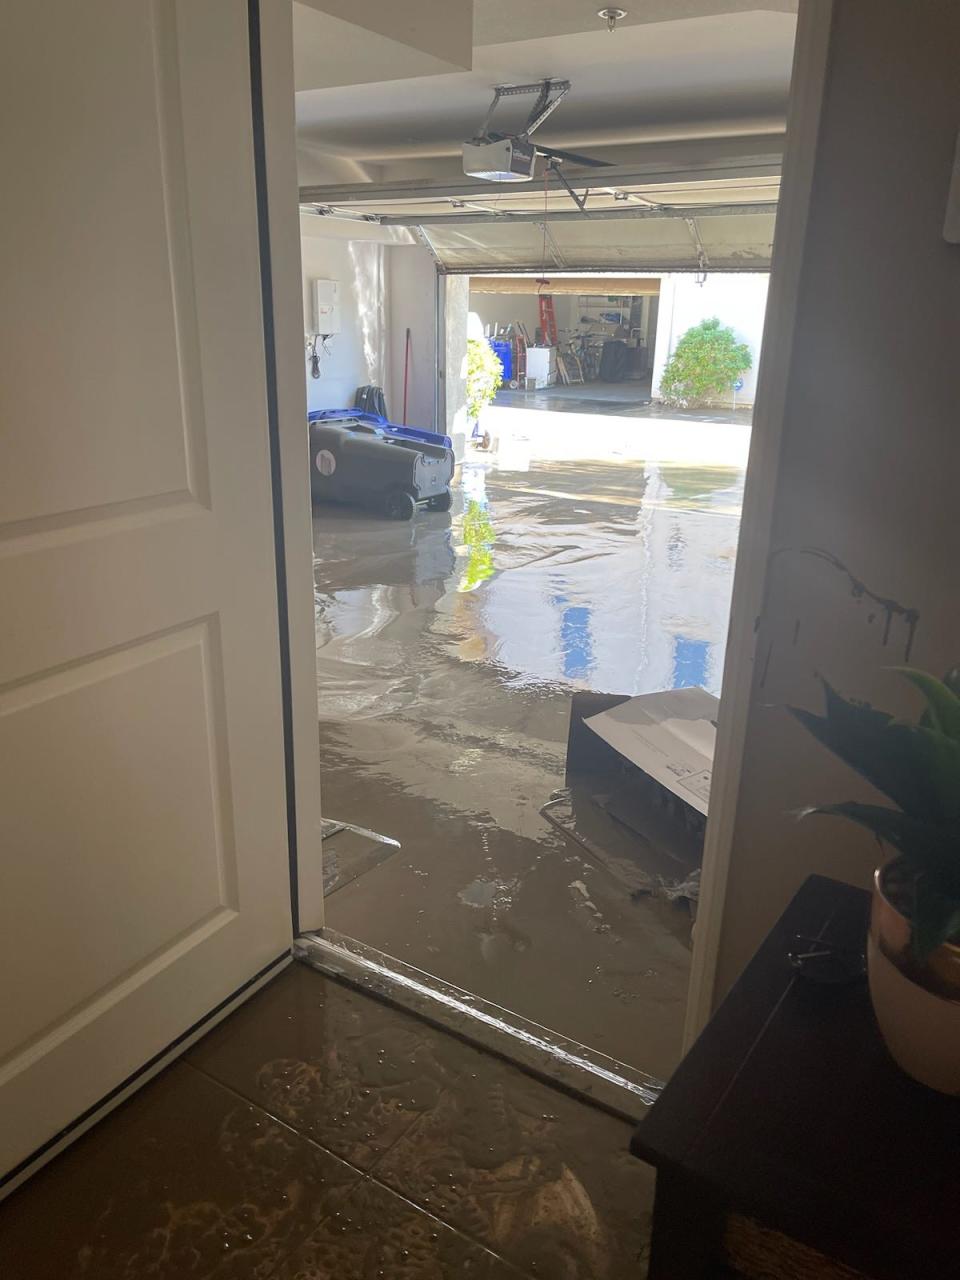 Mud and water seeped into Lydia Duran's garage in the Spanish Walk neighborhood of Palm Desert during Tropical Storm Hilary in August. Seen here is the garage after a crew drained some water from it.